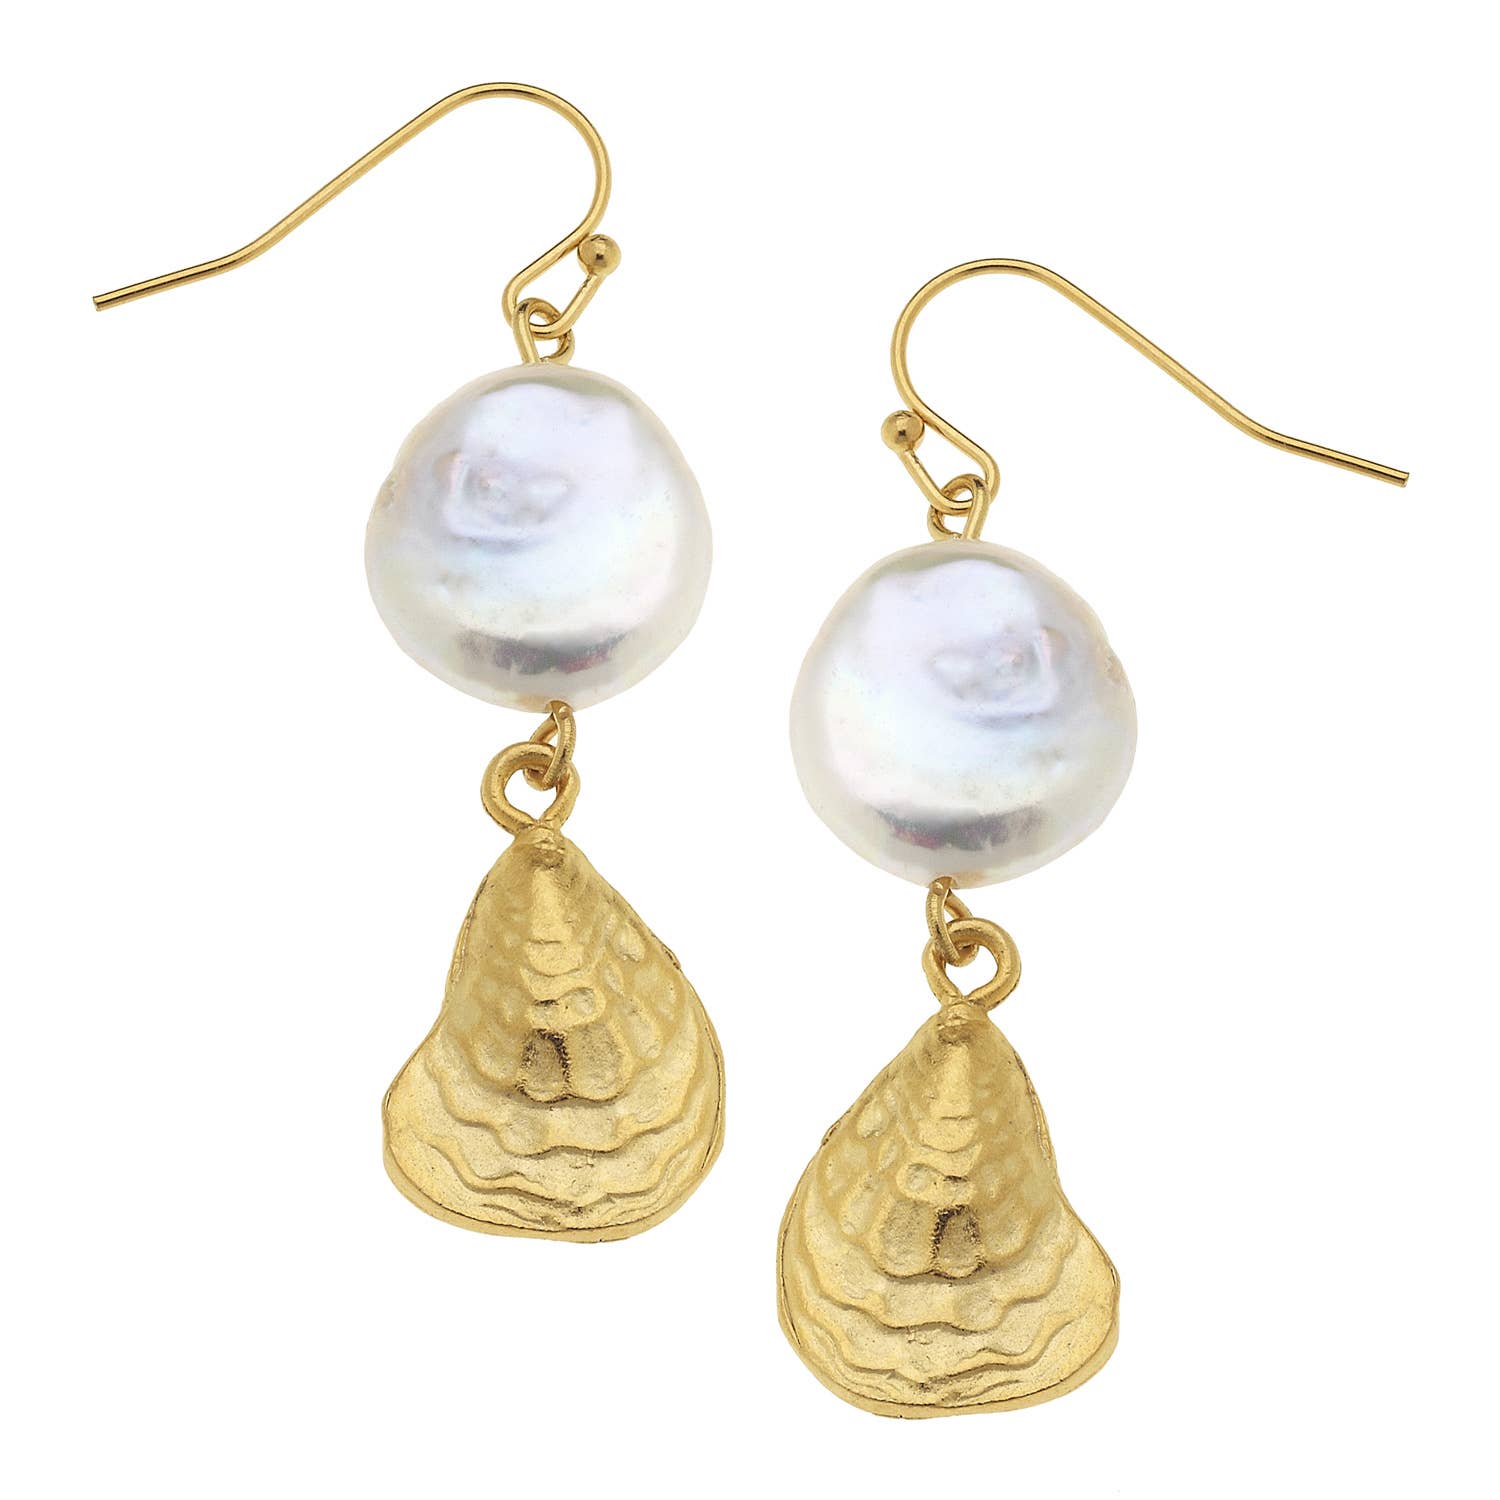 Susan Shaw - Gold Oyster Shell with Genuine Freshwater Pearl Earrings